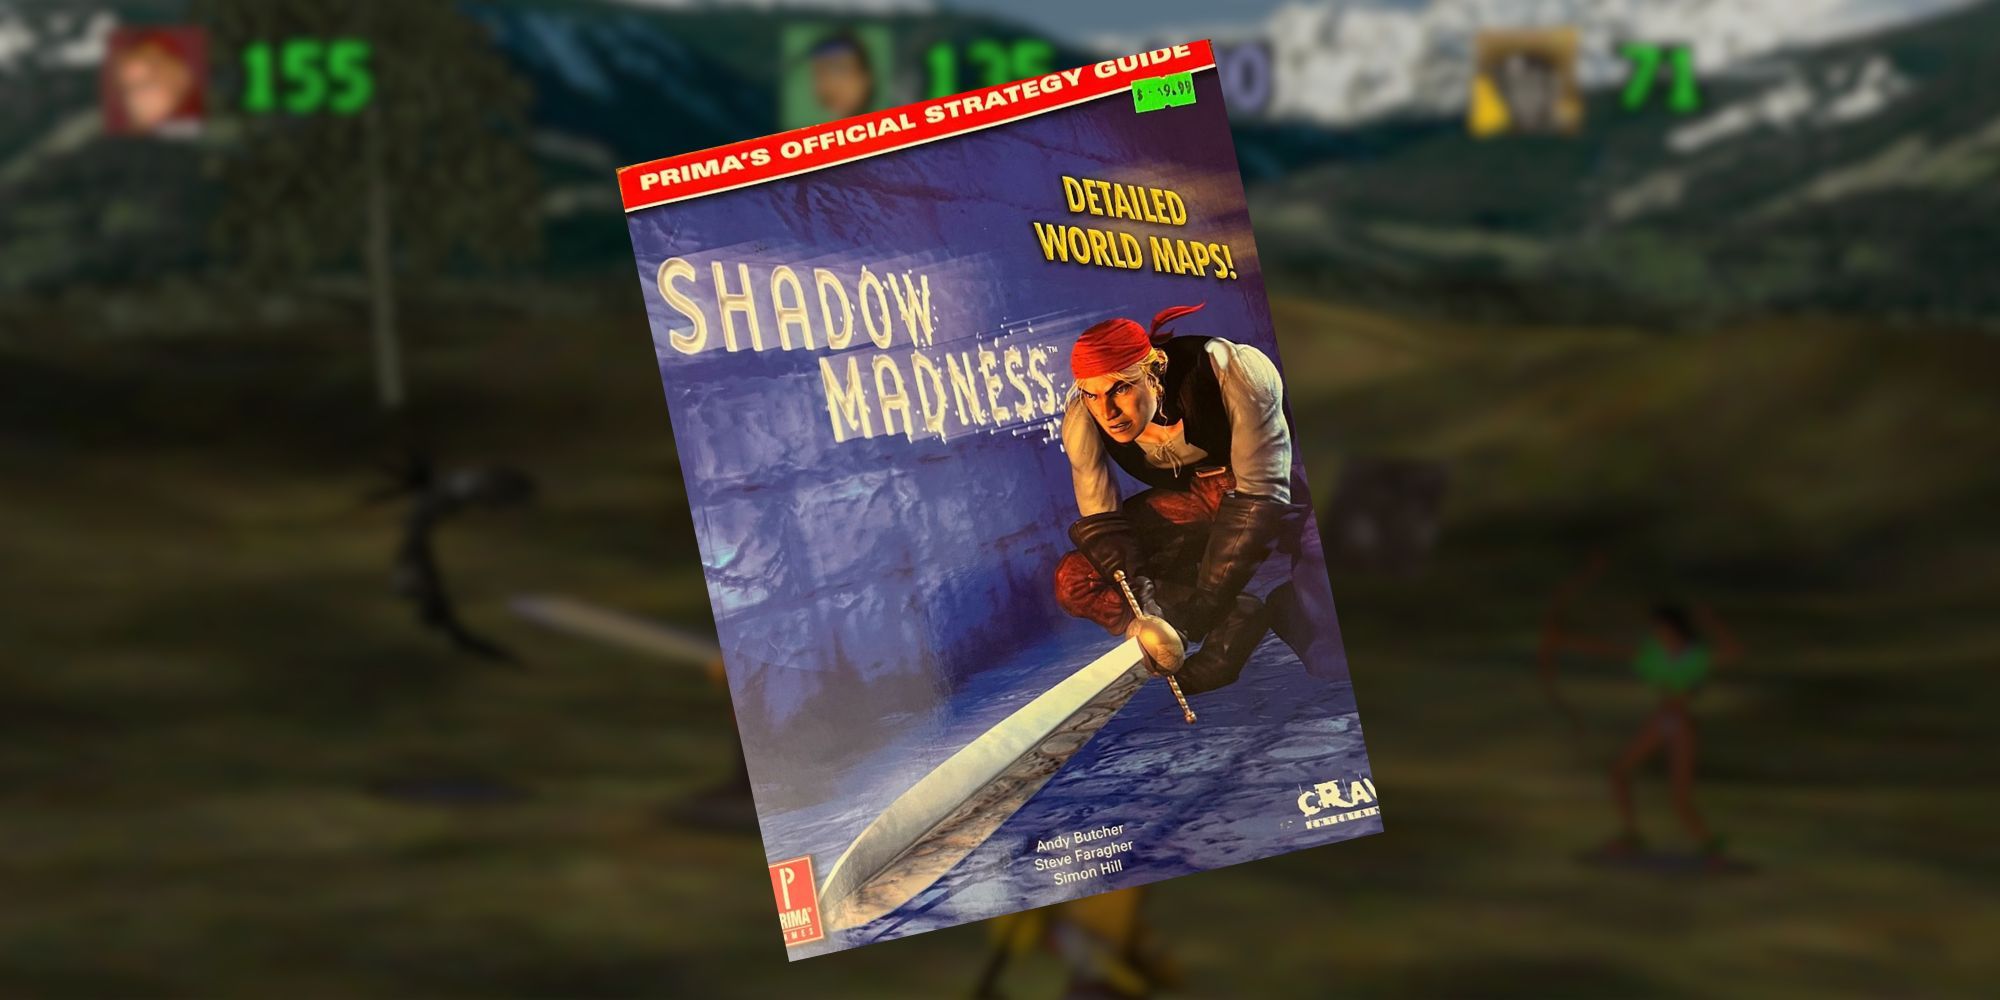 The cover of the Shadow Madness strategy guide. In the background, there's a blurred screenshot of Shadow Madness's gameplay